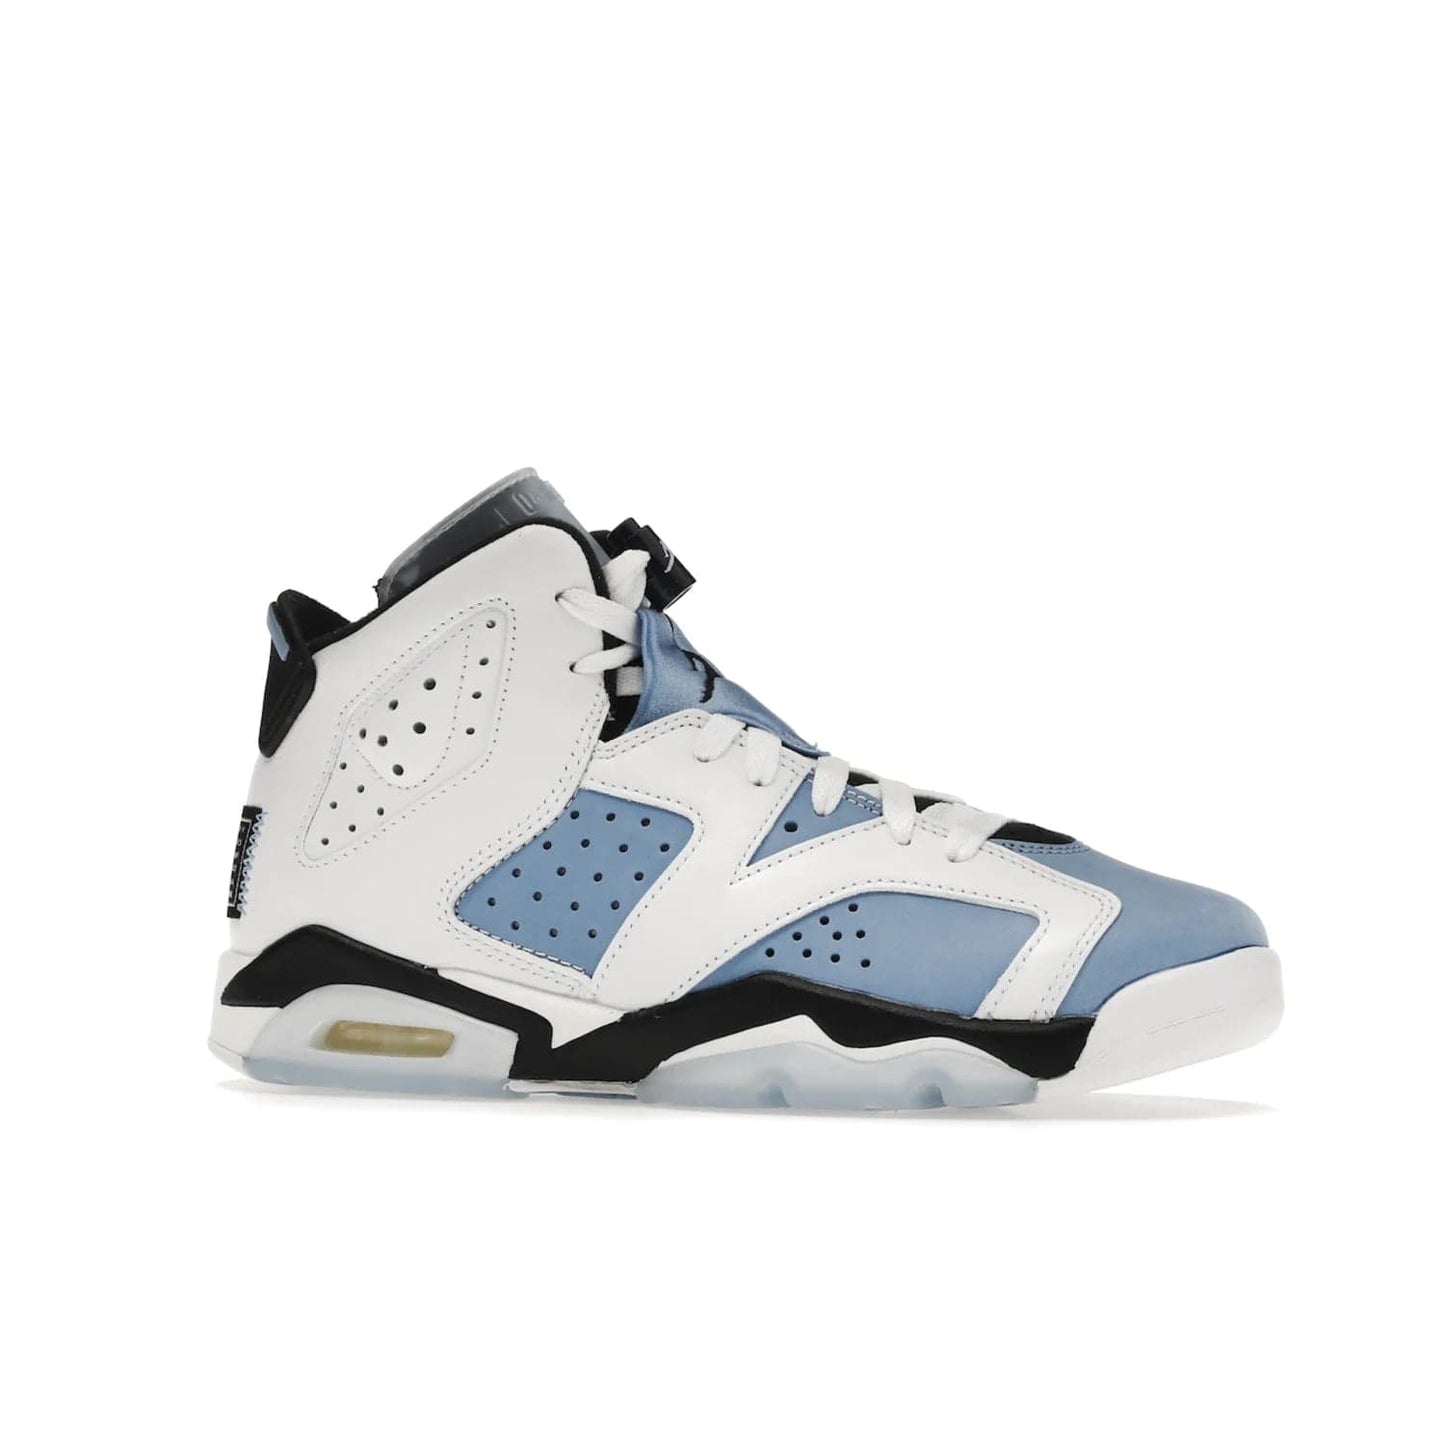 Jordan 6 Retro UNC White (GS) - Image 3 - Only at www.BallersClubKickz.com - Air Jordan 6 Retro UNC White GS: Michael Jordan alma mater, UNC Tar Heels, featuring colorway, nubuck, leather, Jumpman branding and a visible Air unit. Translucent blue/white outsole, perfect for completing sneaker rotation.